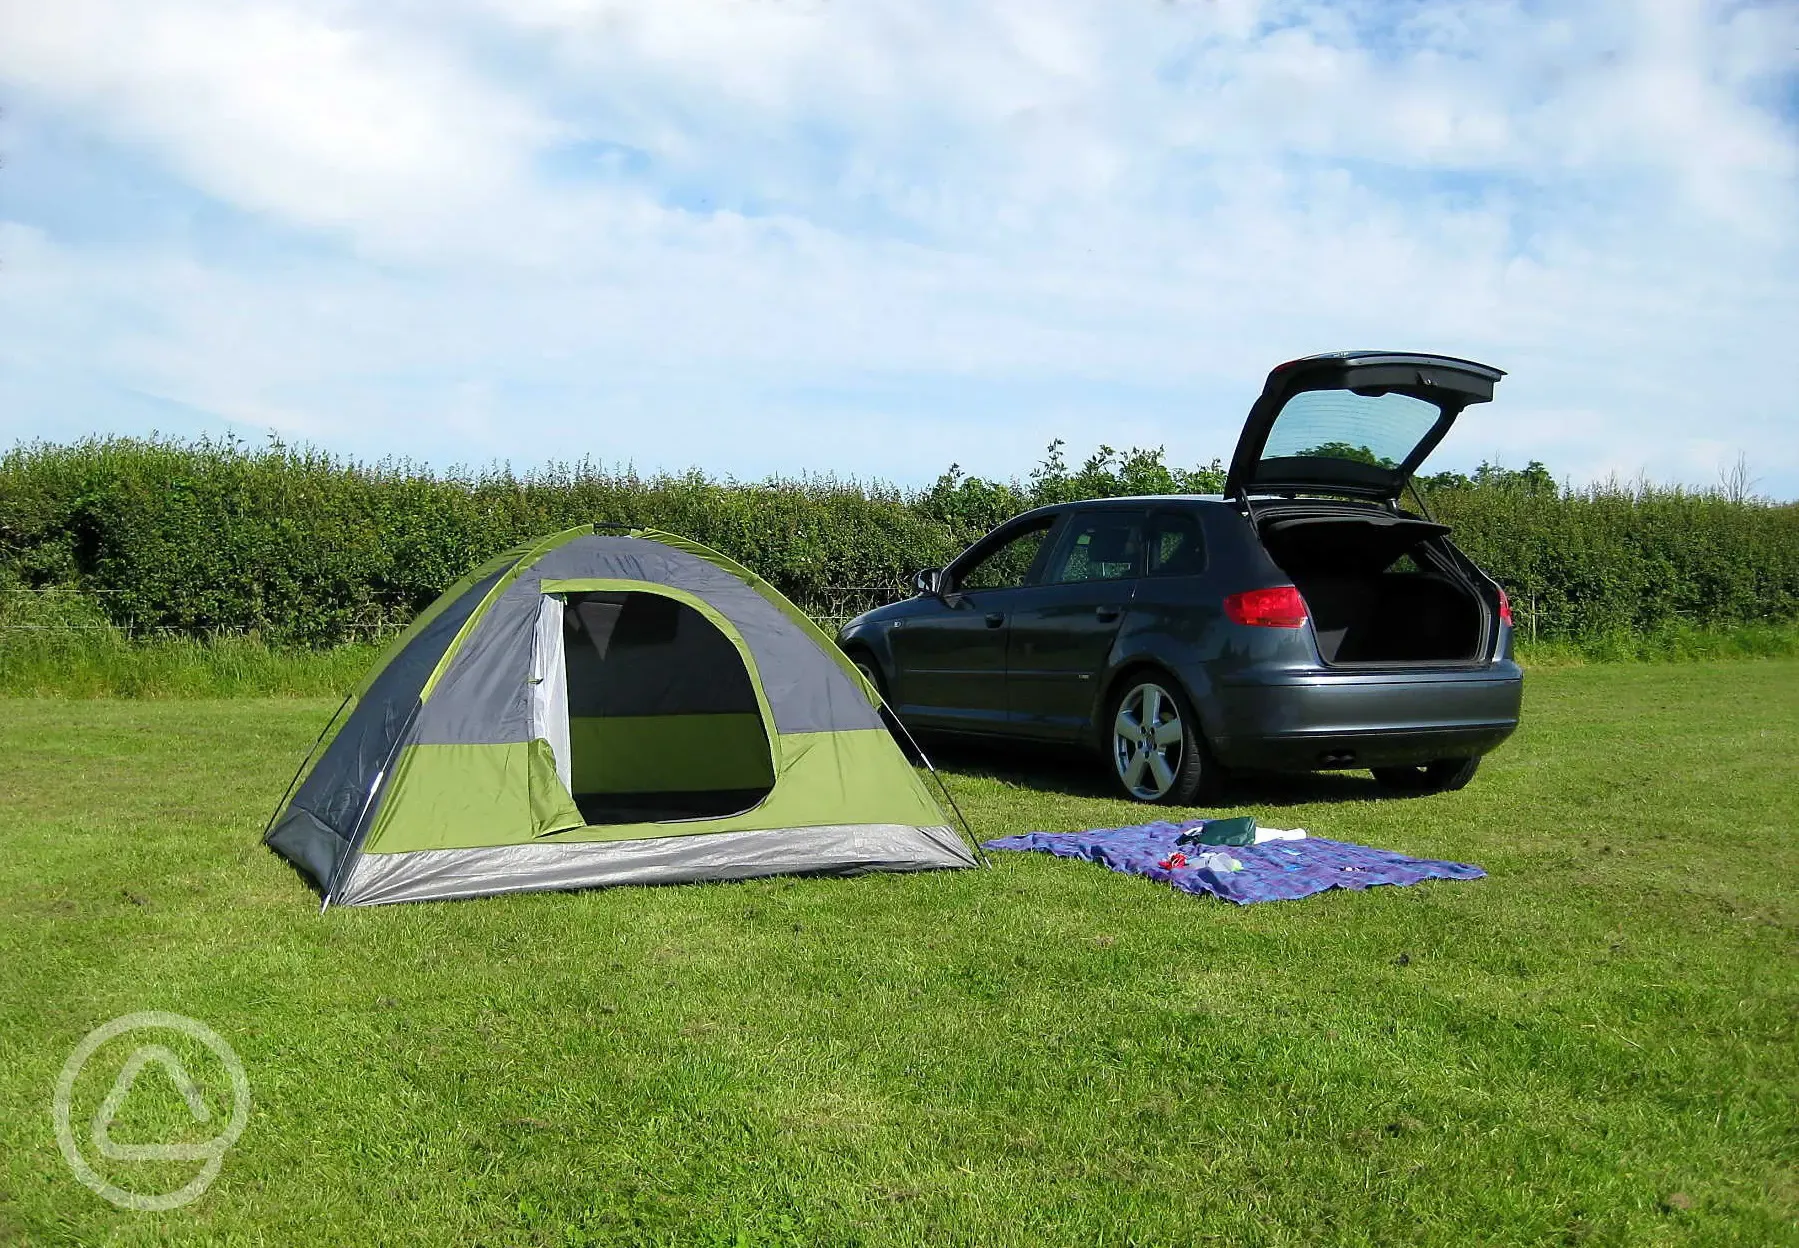 Camping at Higher Moor Farm Campsite